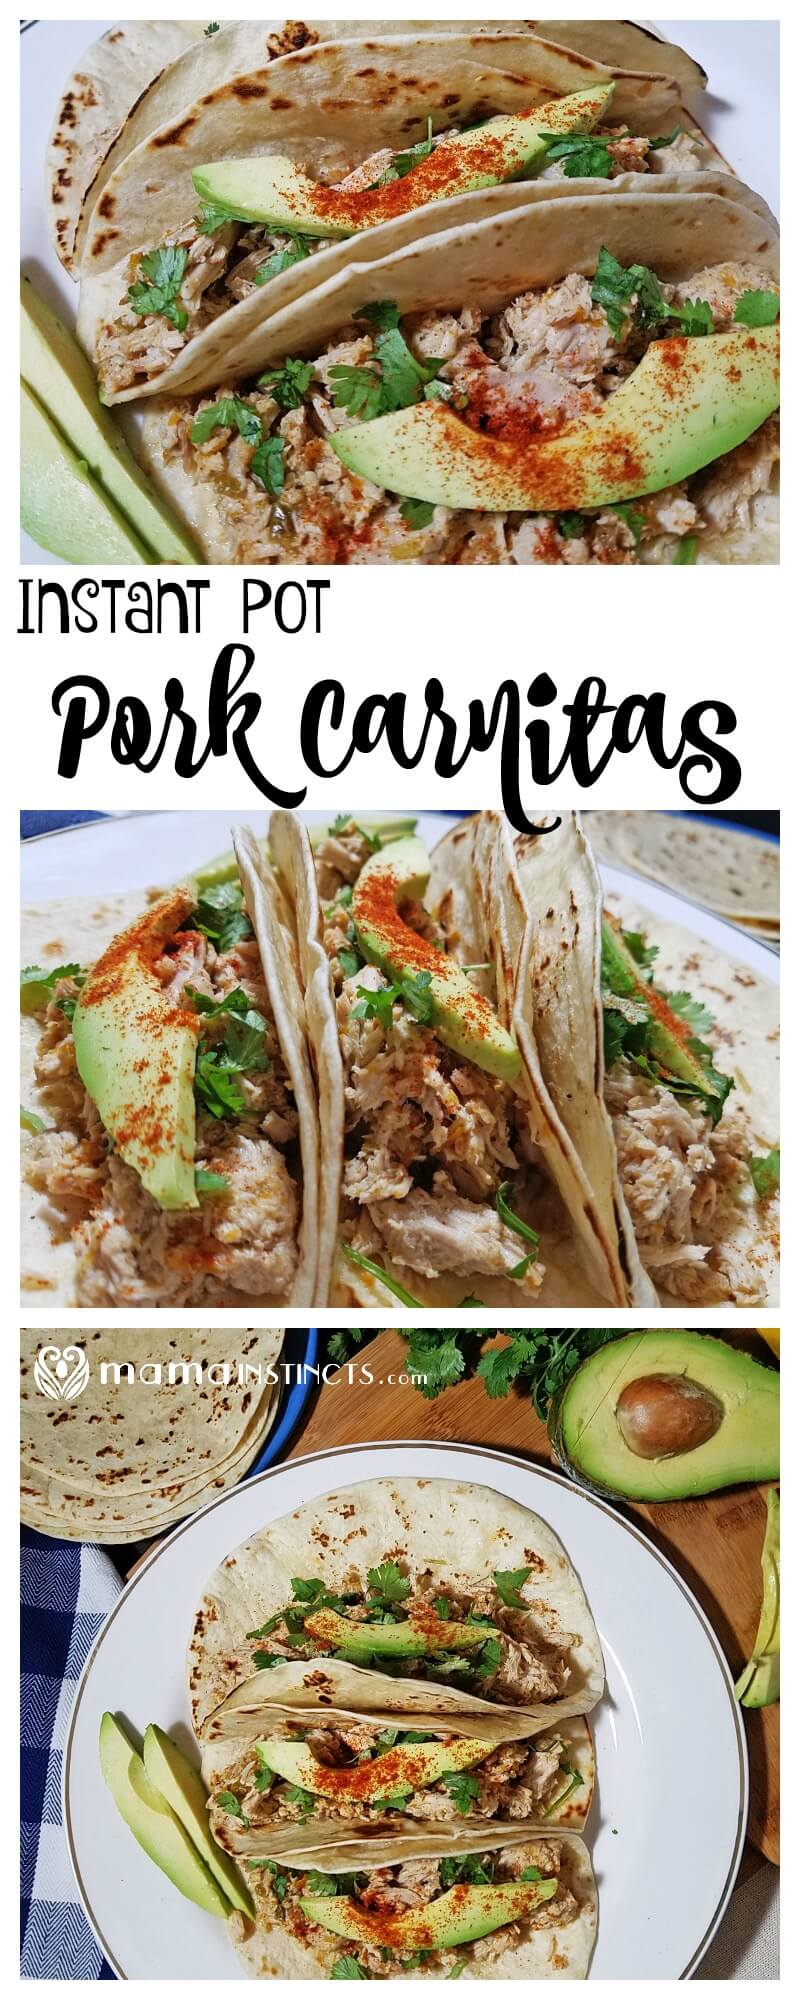 Try this easy Instant Pot Pork Carnitas recipe. It's great to eat with tacos, burritos, quesadillas and even a salad. The juiciest and most tender pork you'll ever eat.